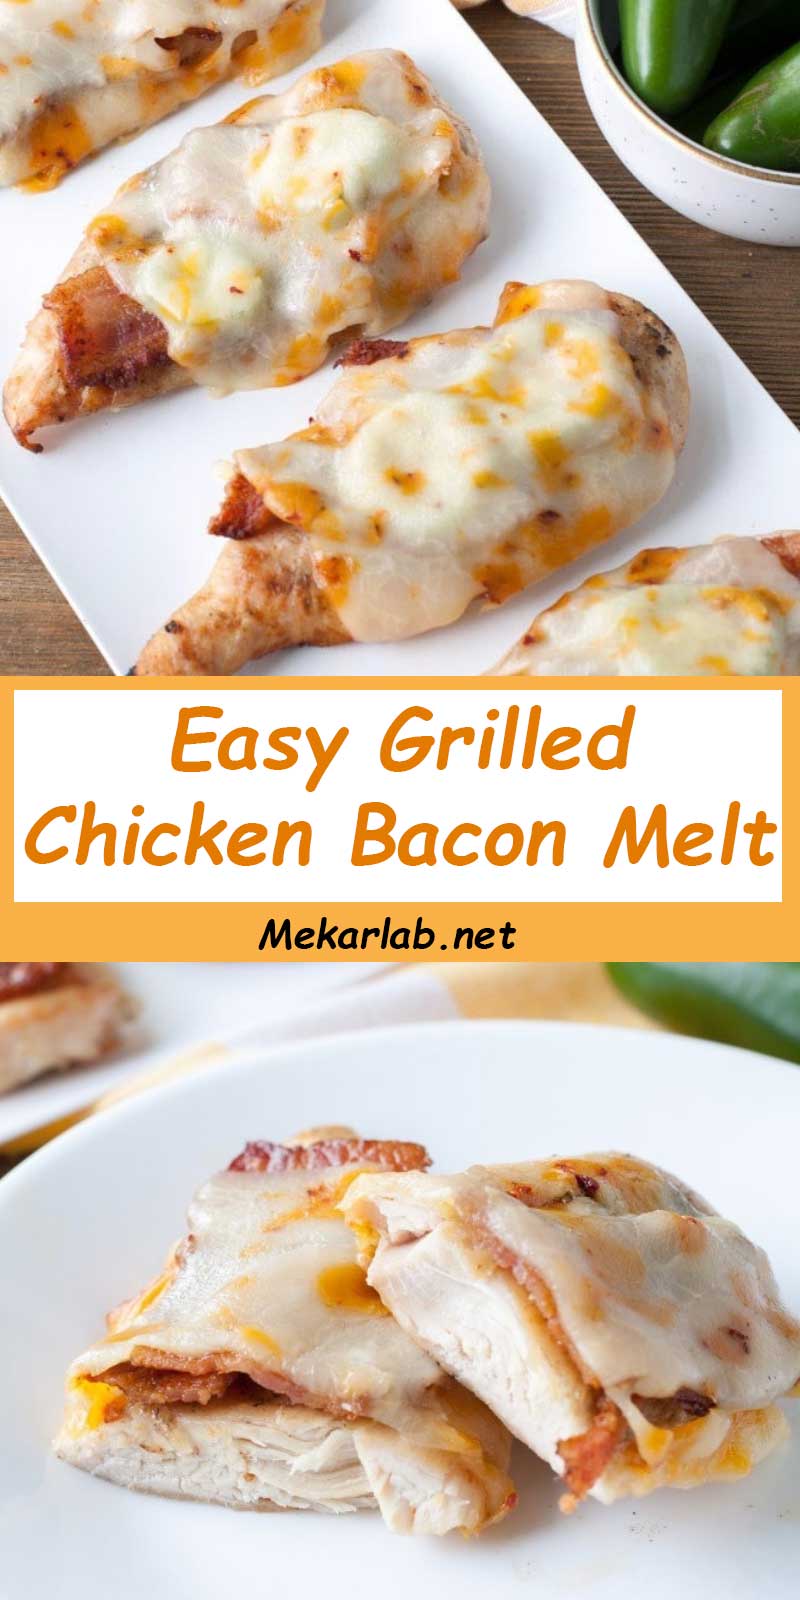 Easy Grilled Chicken Bacon Melt